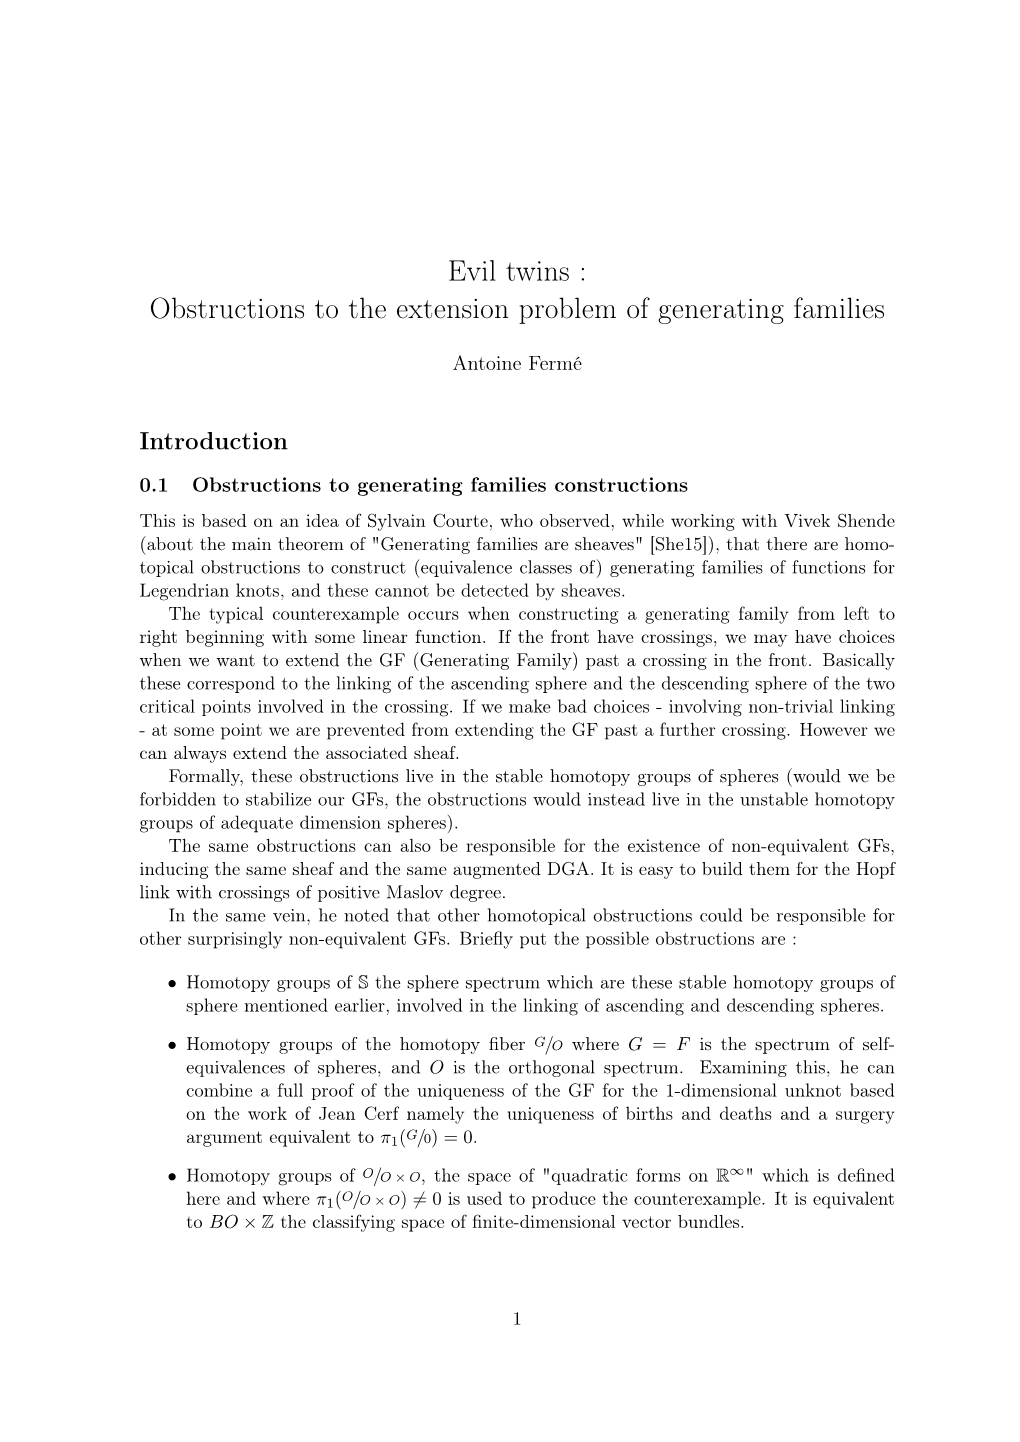 Obstructions to the Extension Problem of Generating Families